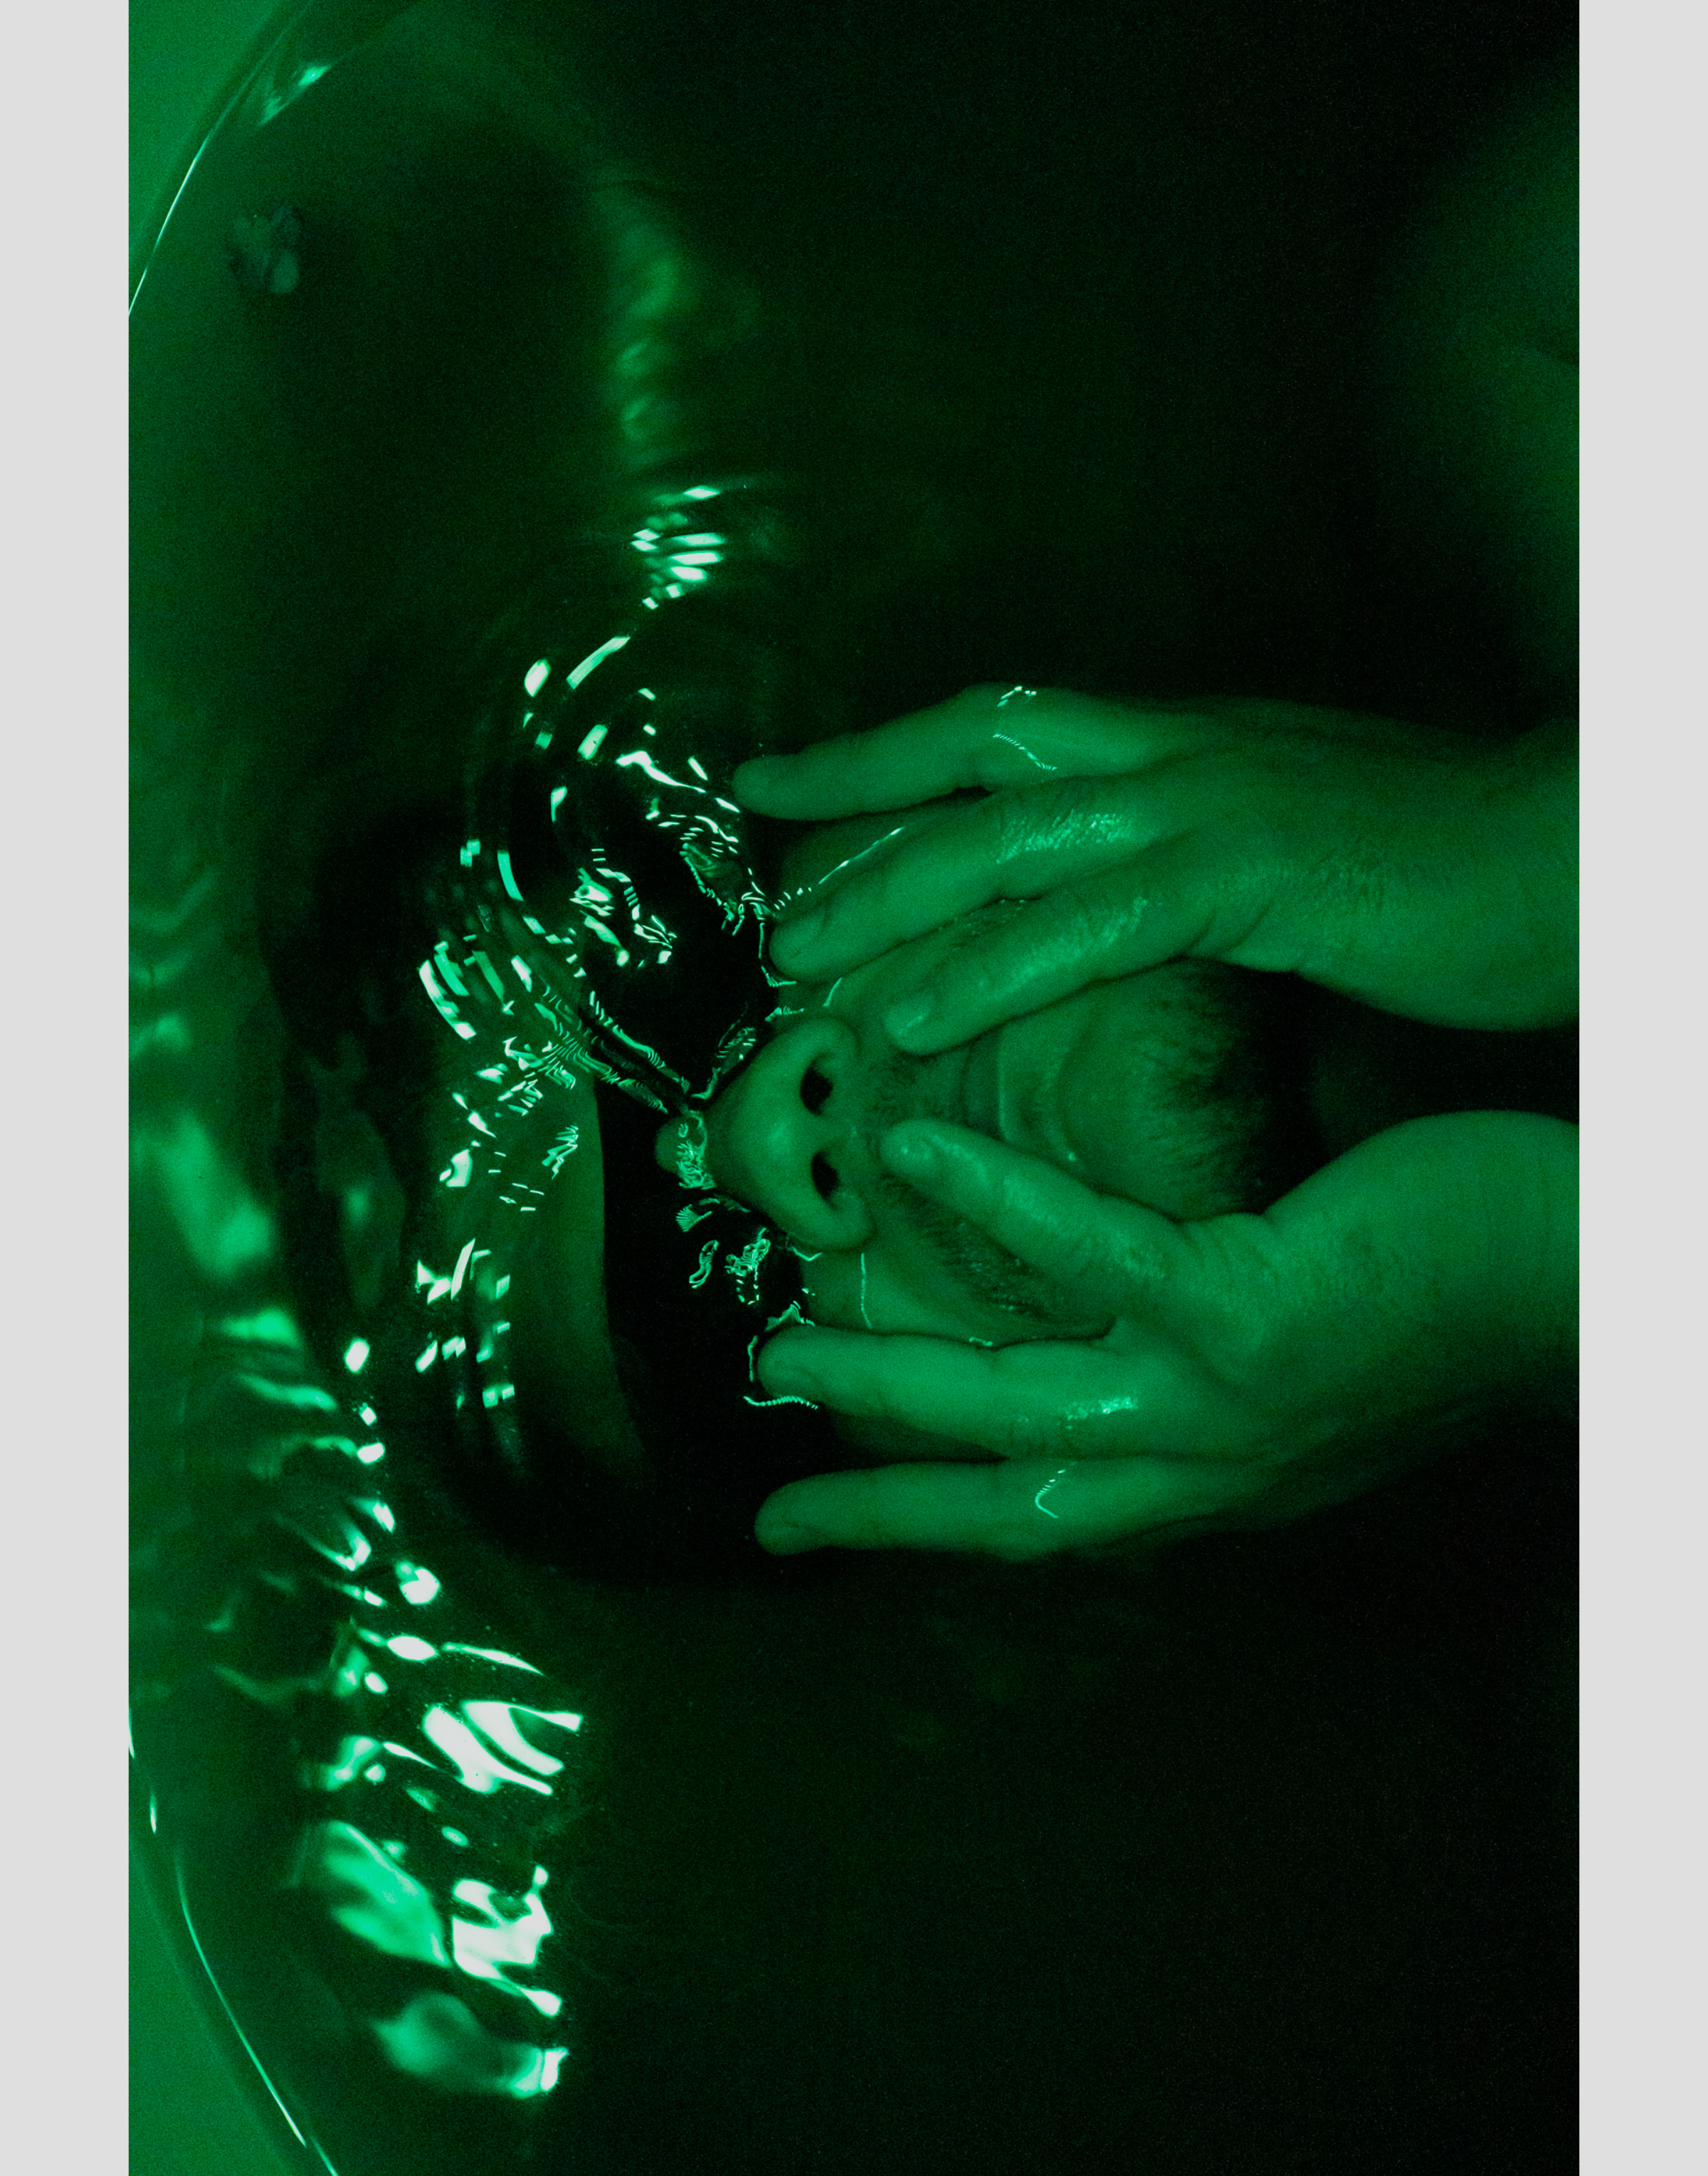 An image of a man in green liquid